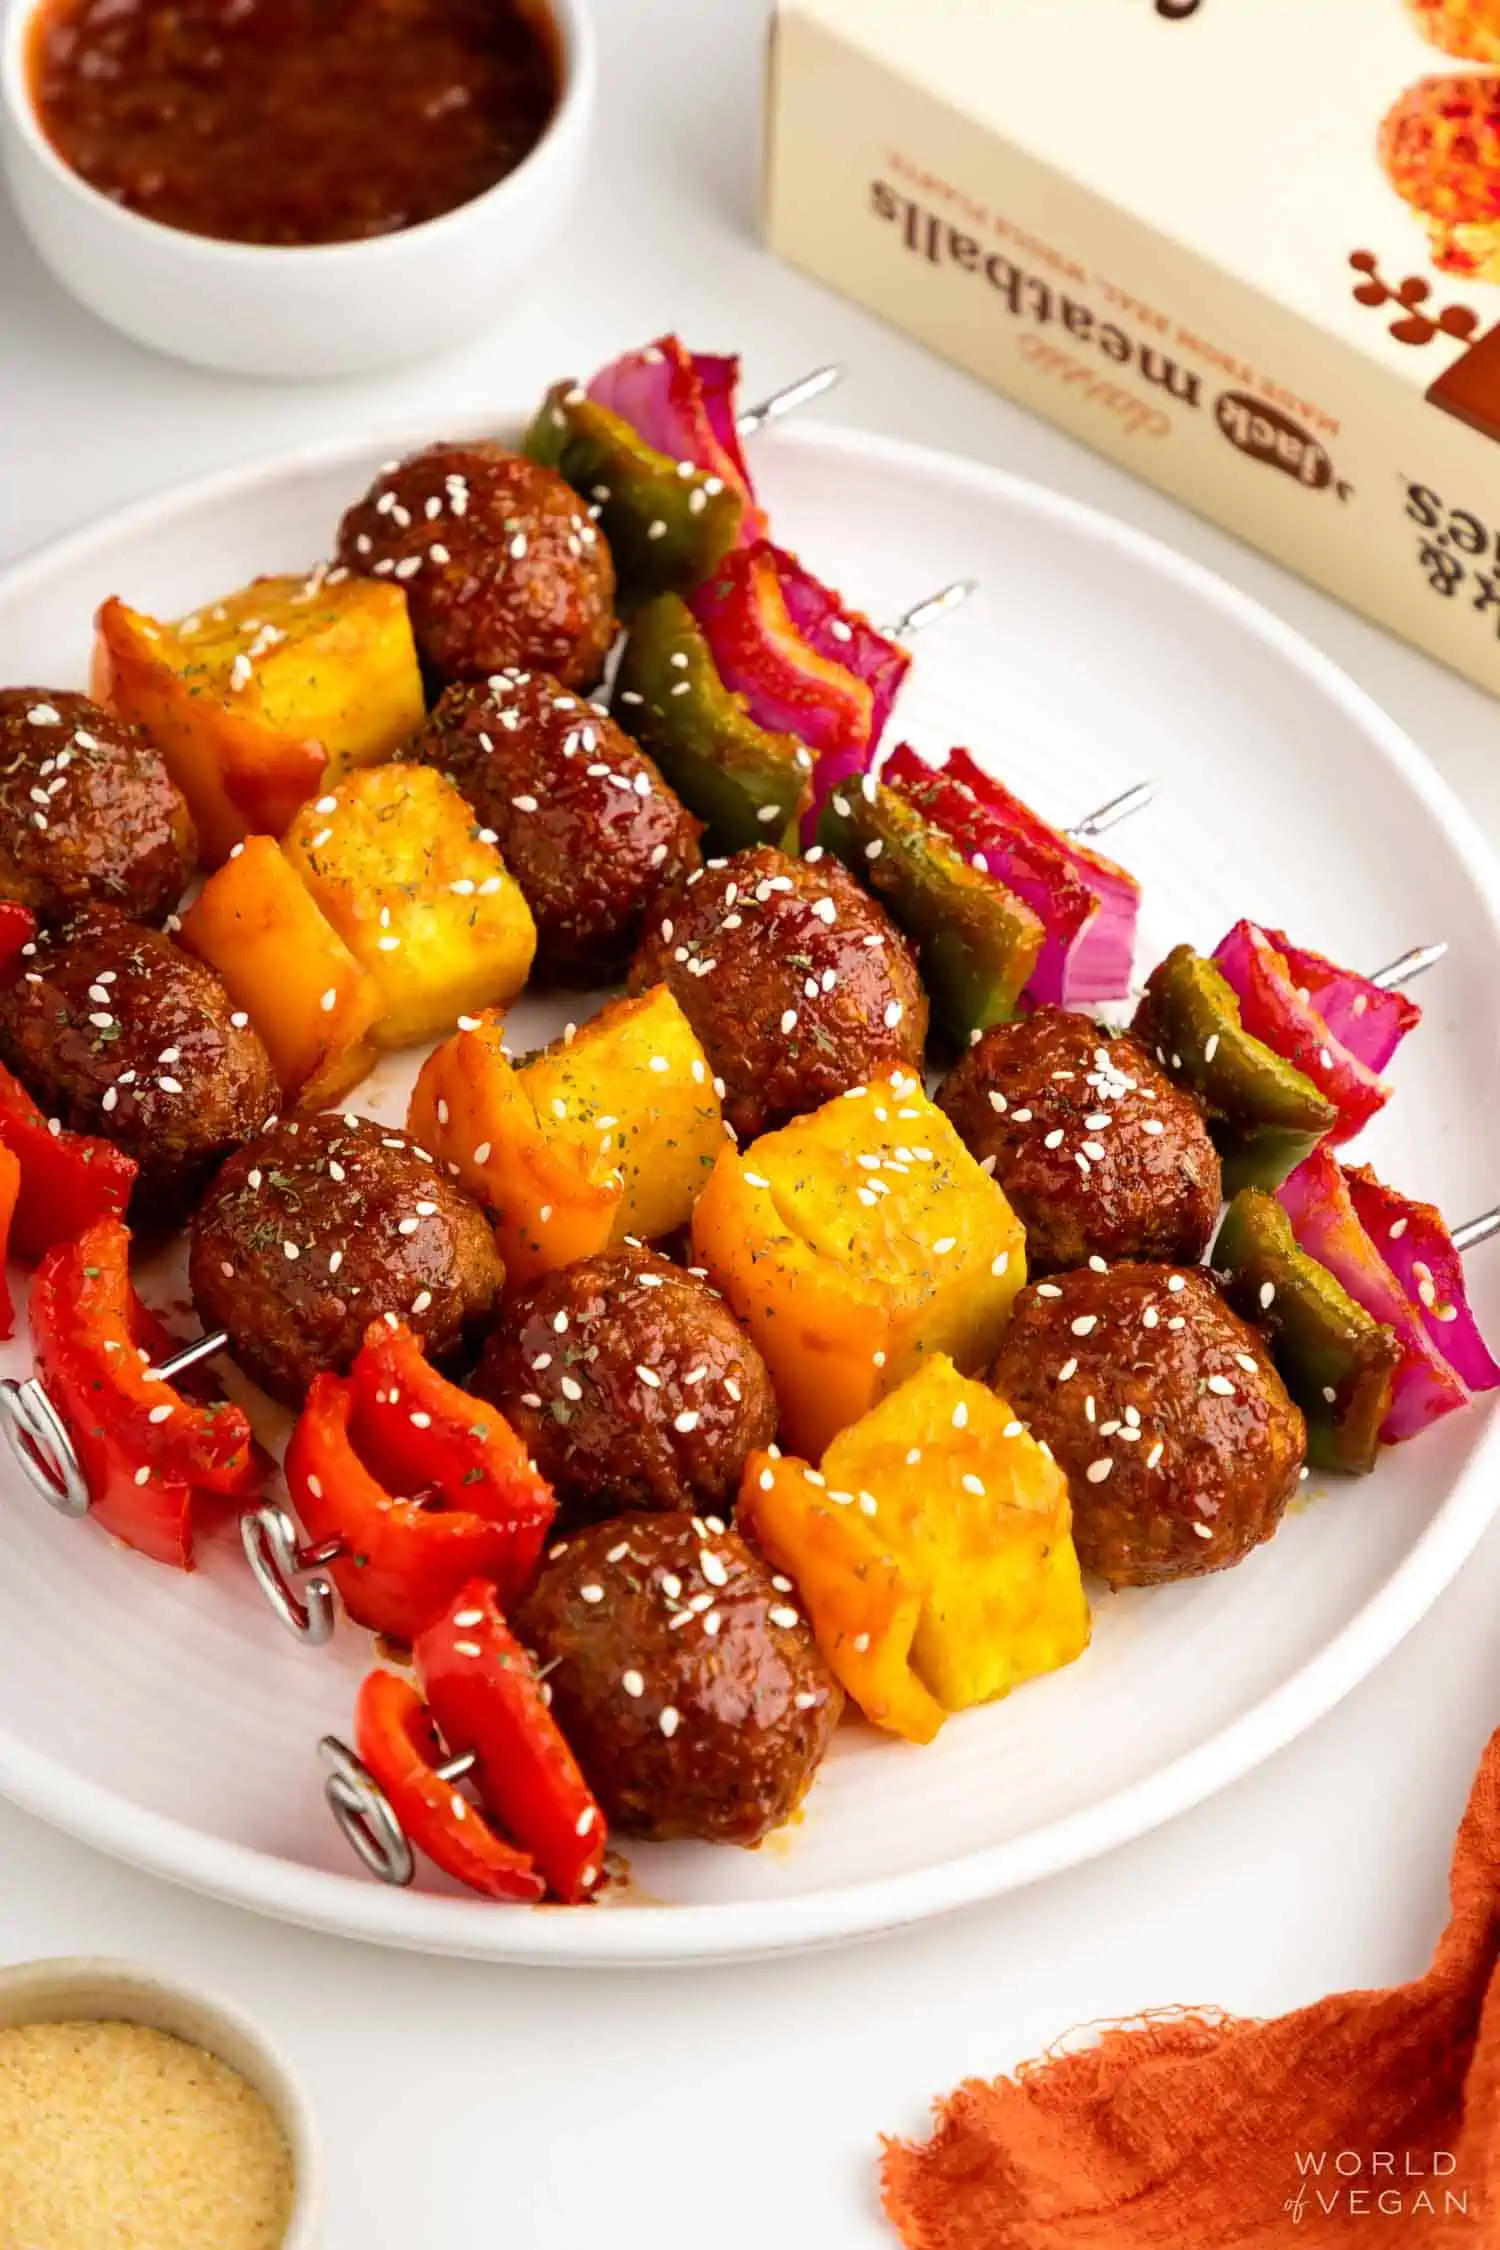 Vegan kabob skewers with veggies meatballs pineapple and sweet and sour sauce on a plate.